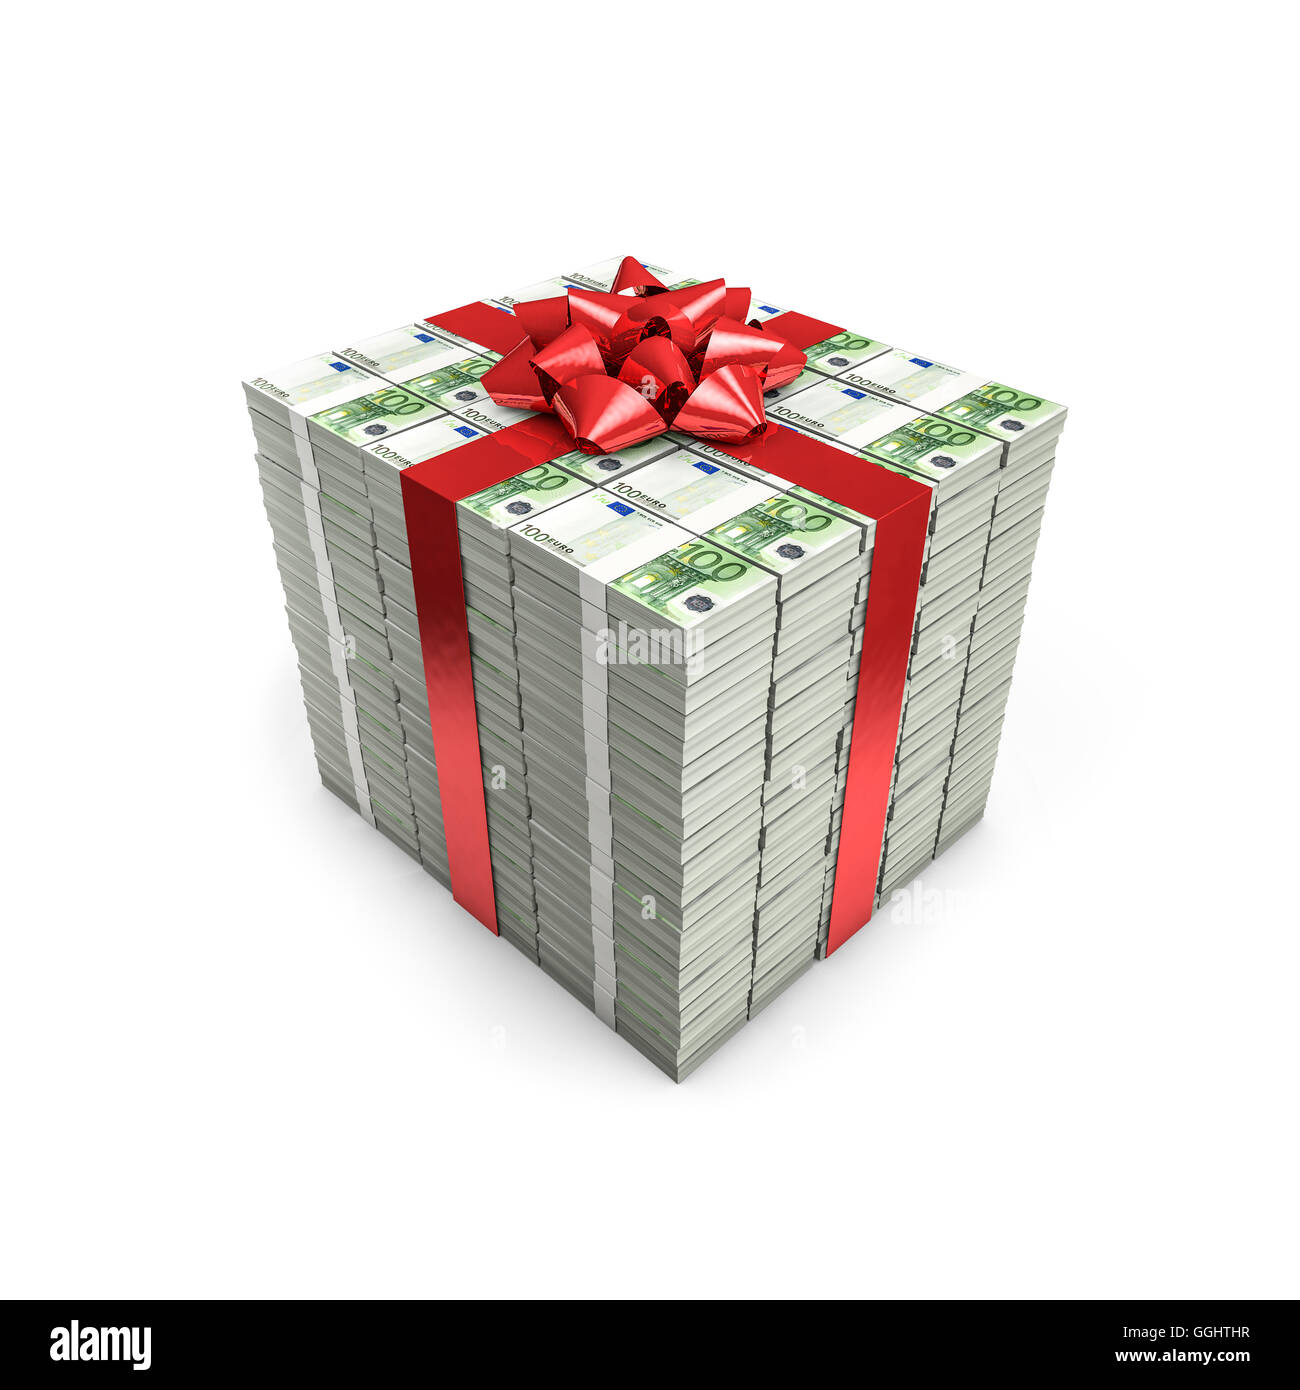 Money gift euros / 3D illustration of stacks of hundred euro notes tied with ribbon Stock Photo